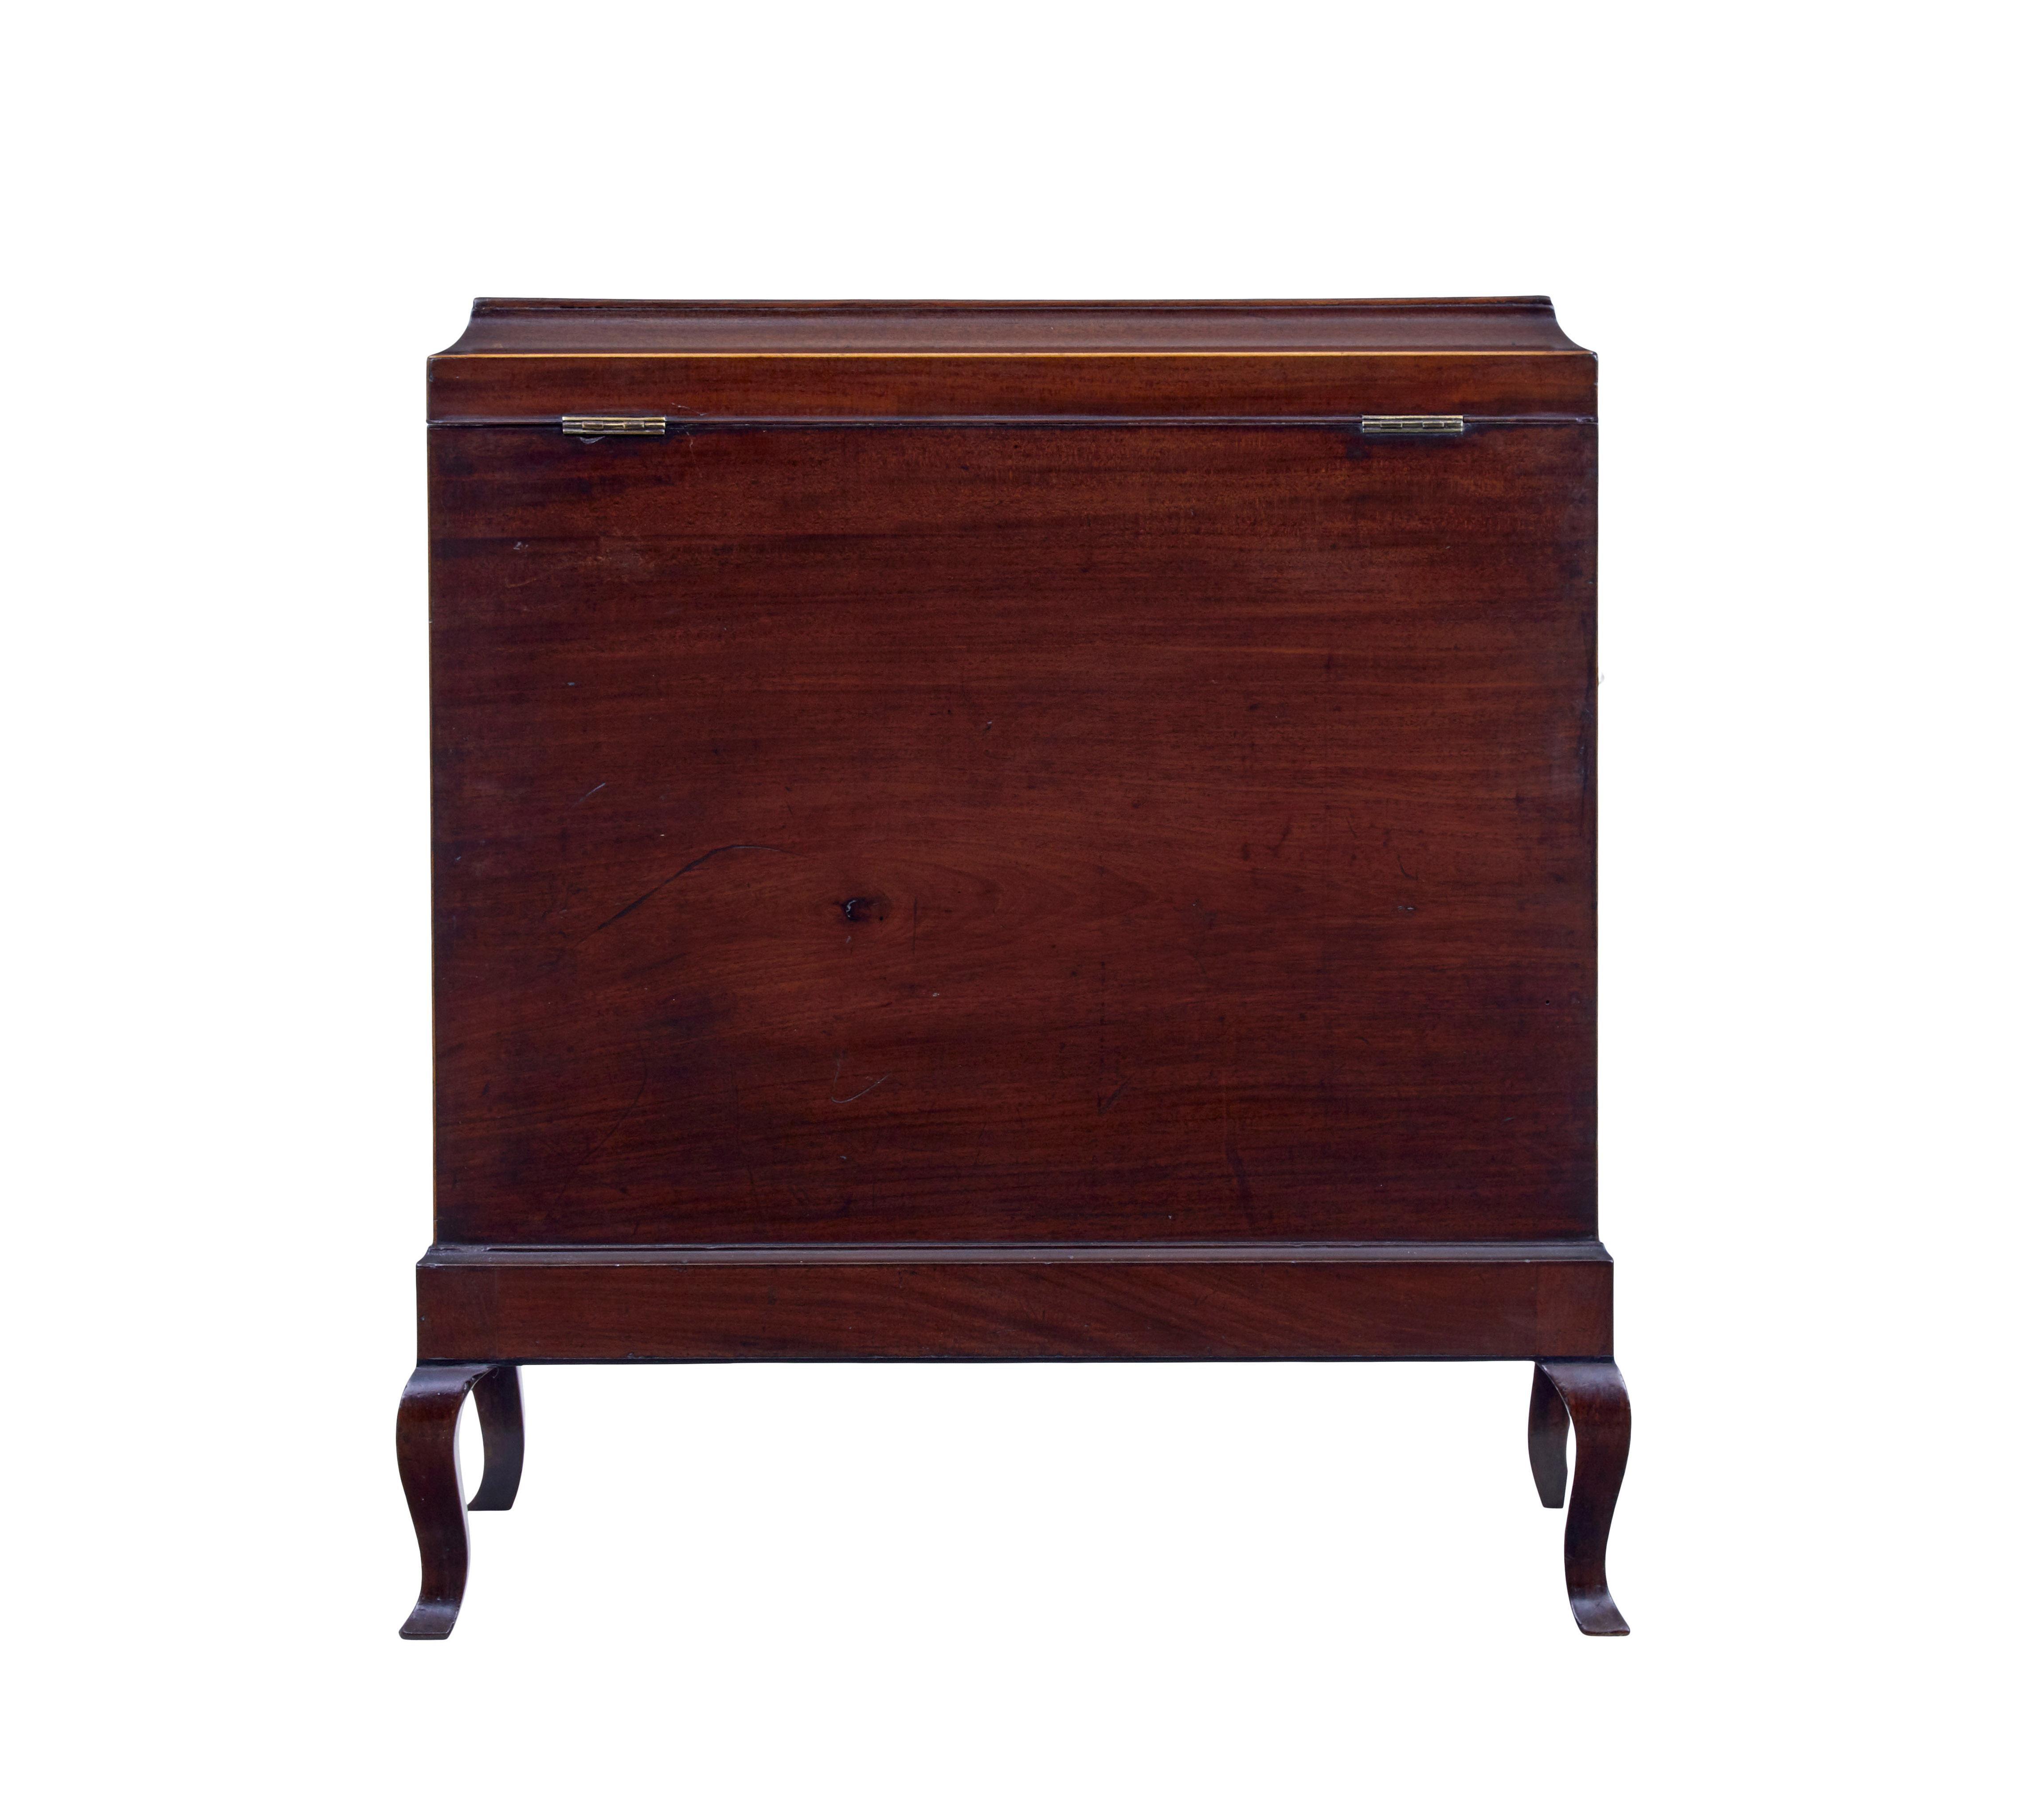 Hand-Crafted Early 20th century Edwardian mahogany inlaid wine cooler For Sale